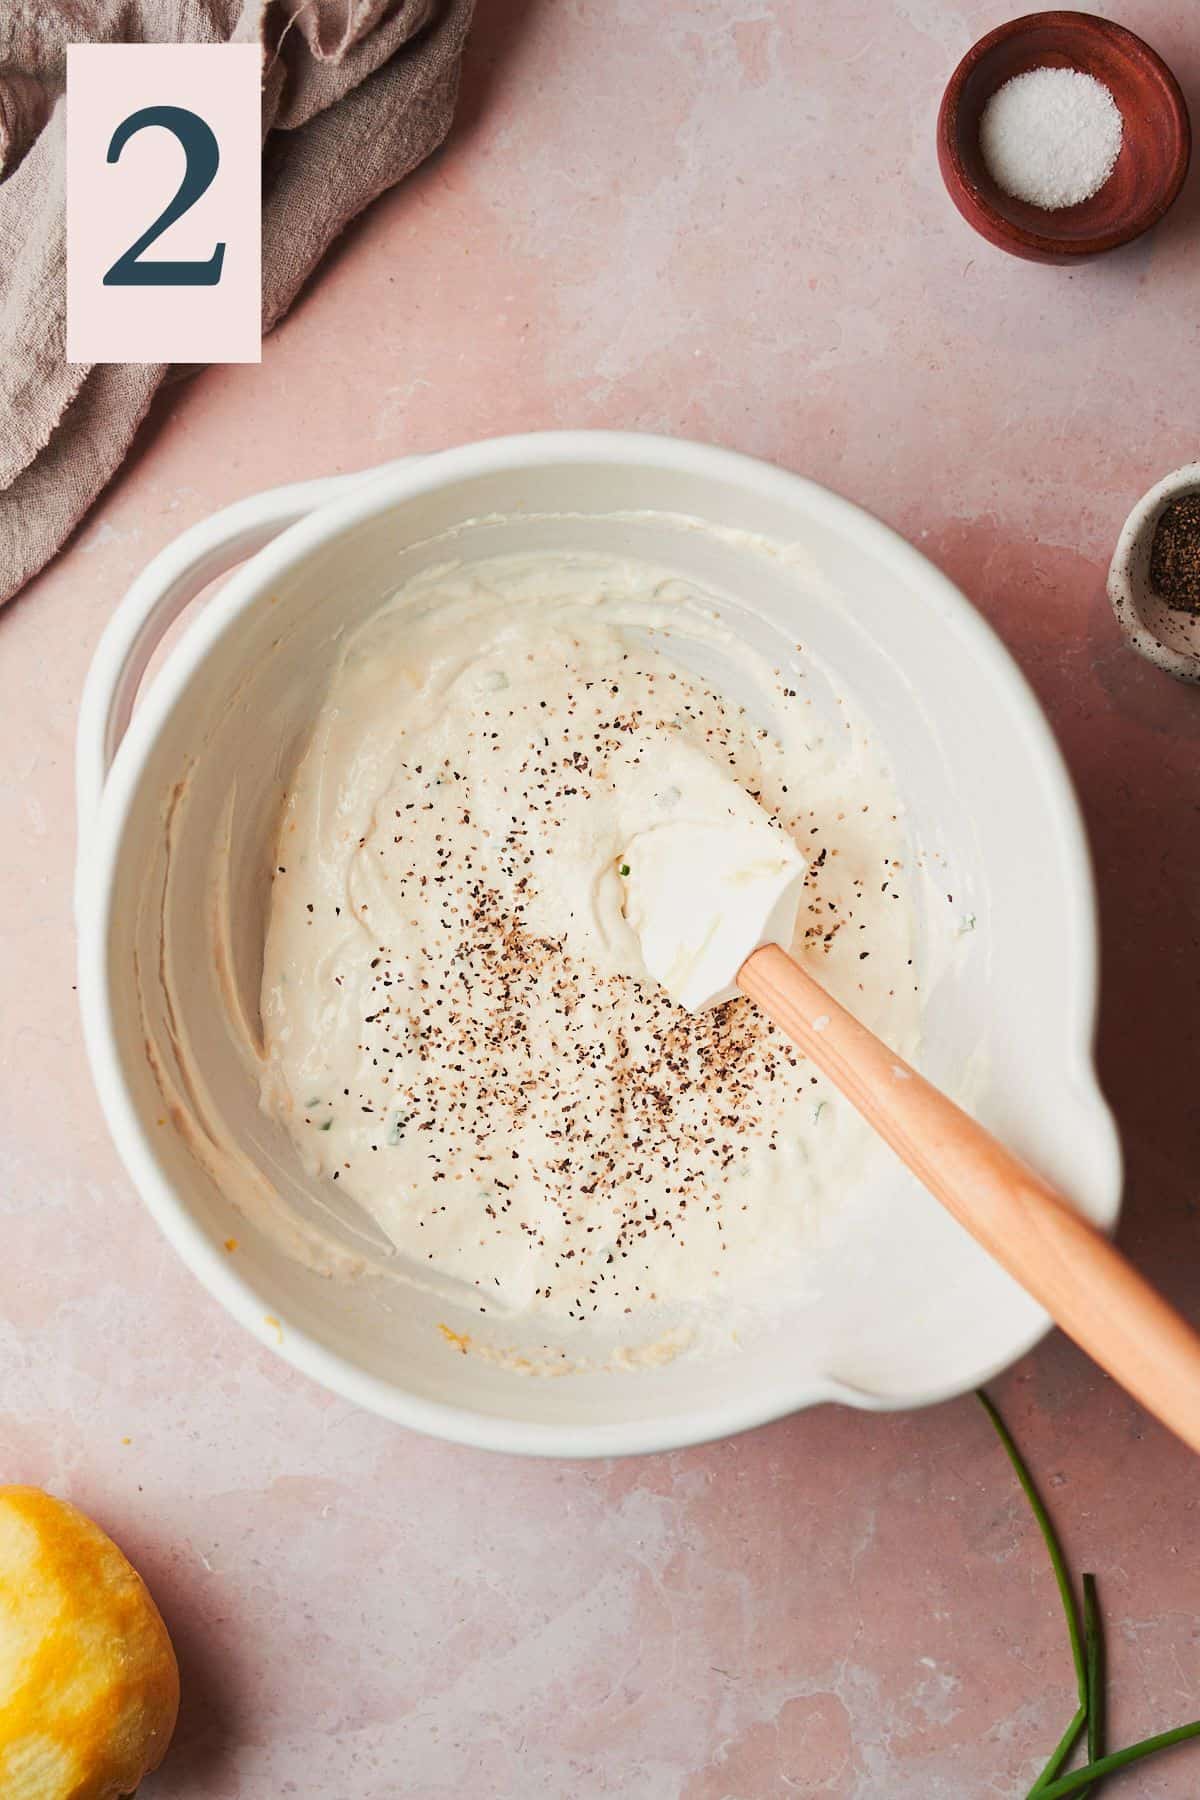 creamy horseradish sauce mixed together with salt and pepper added to the bowl with a rubber spatula.